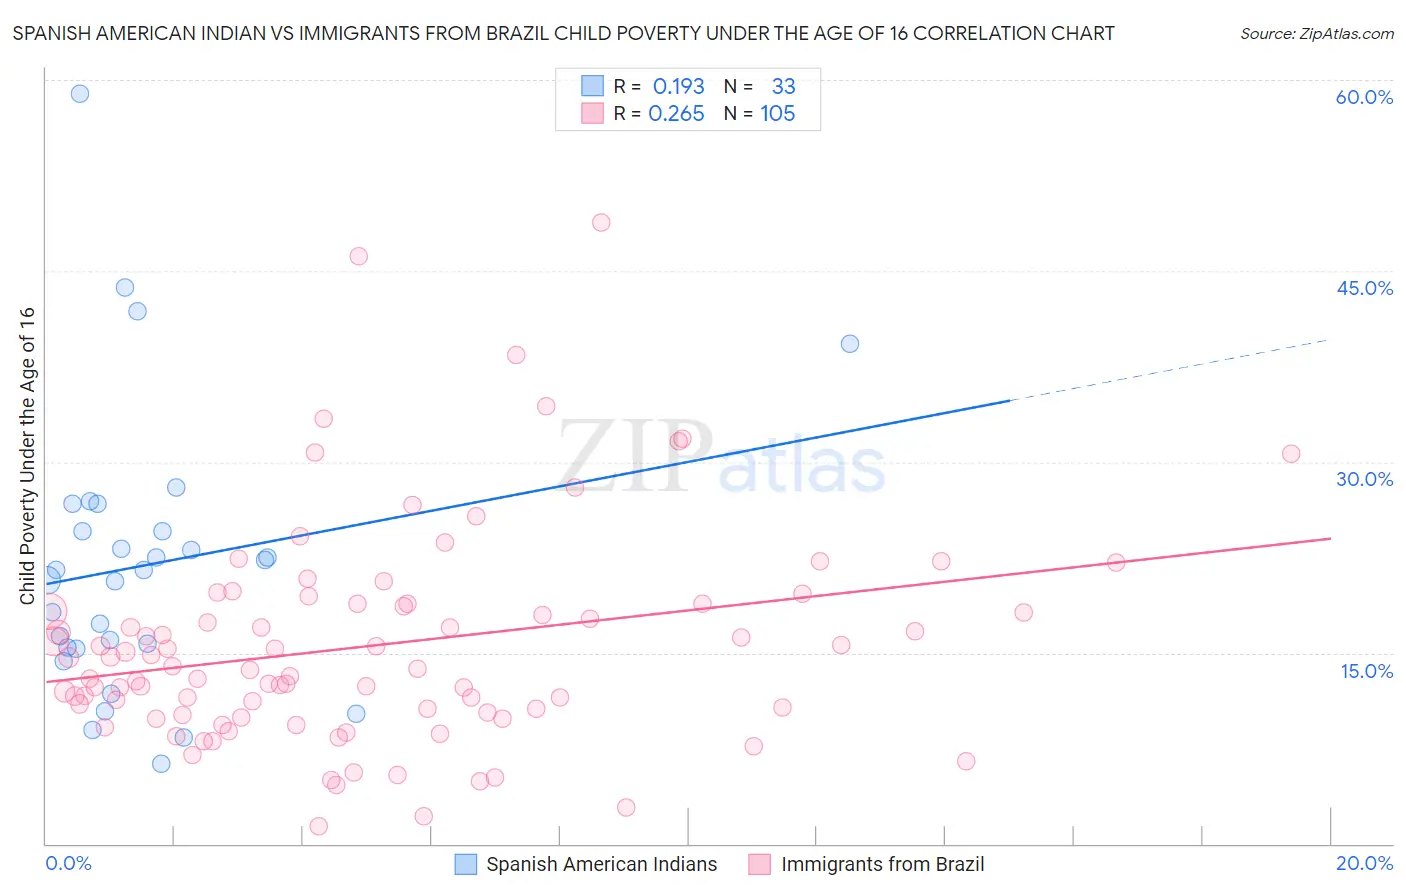 Spanish American Indian vs Immigrants from Brazil Child Poverty Under the Age of 16